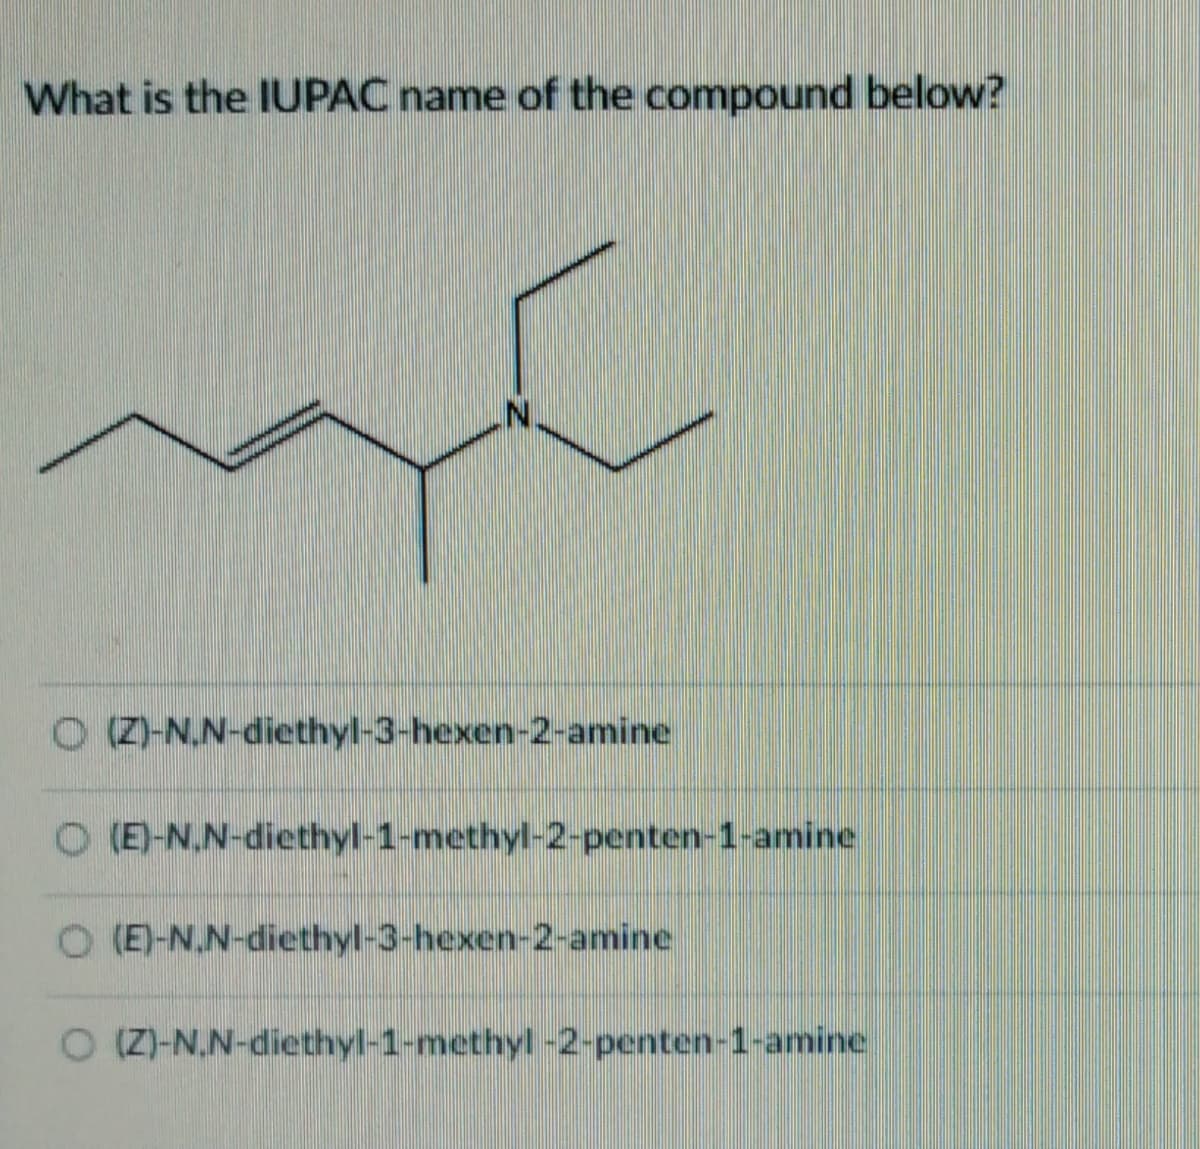 What is the IUPAC name of the compound below?
O(Z)-N.N-diethyl-3-hexen-2-amine
O(E)-N,N-diethyl-1-methyl-2-penten-1-amine
O (E)-N.N-diethyl-3-hexen-2-amine
O (Z)-N,N-diethyl-1-methyl-2-penten-1-amine